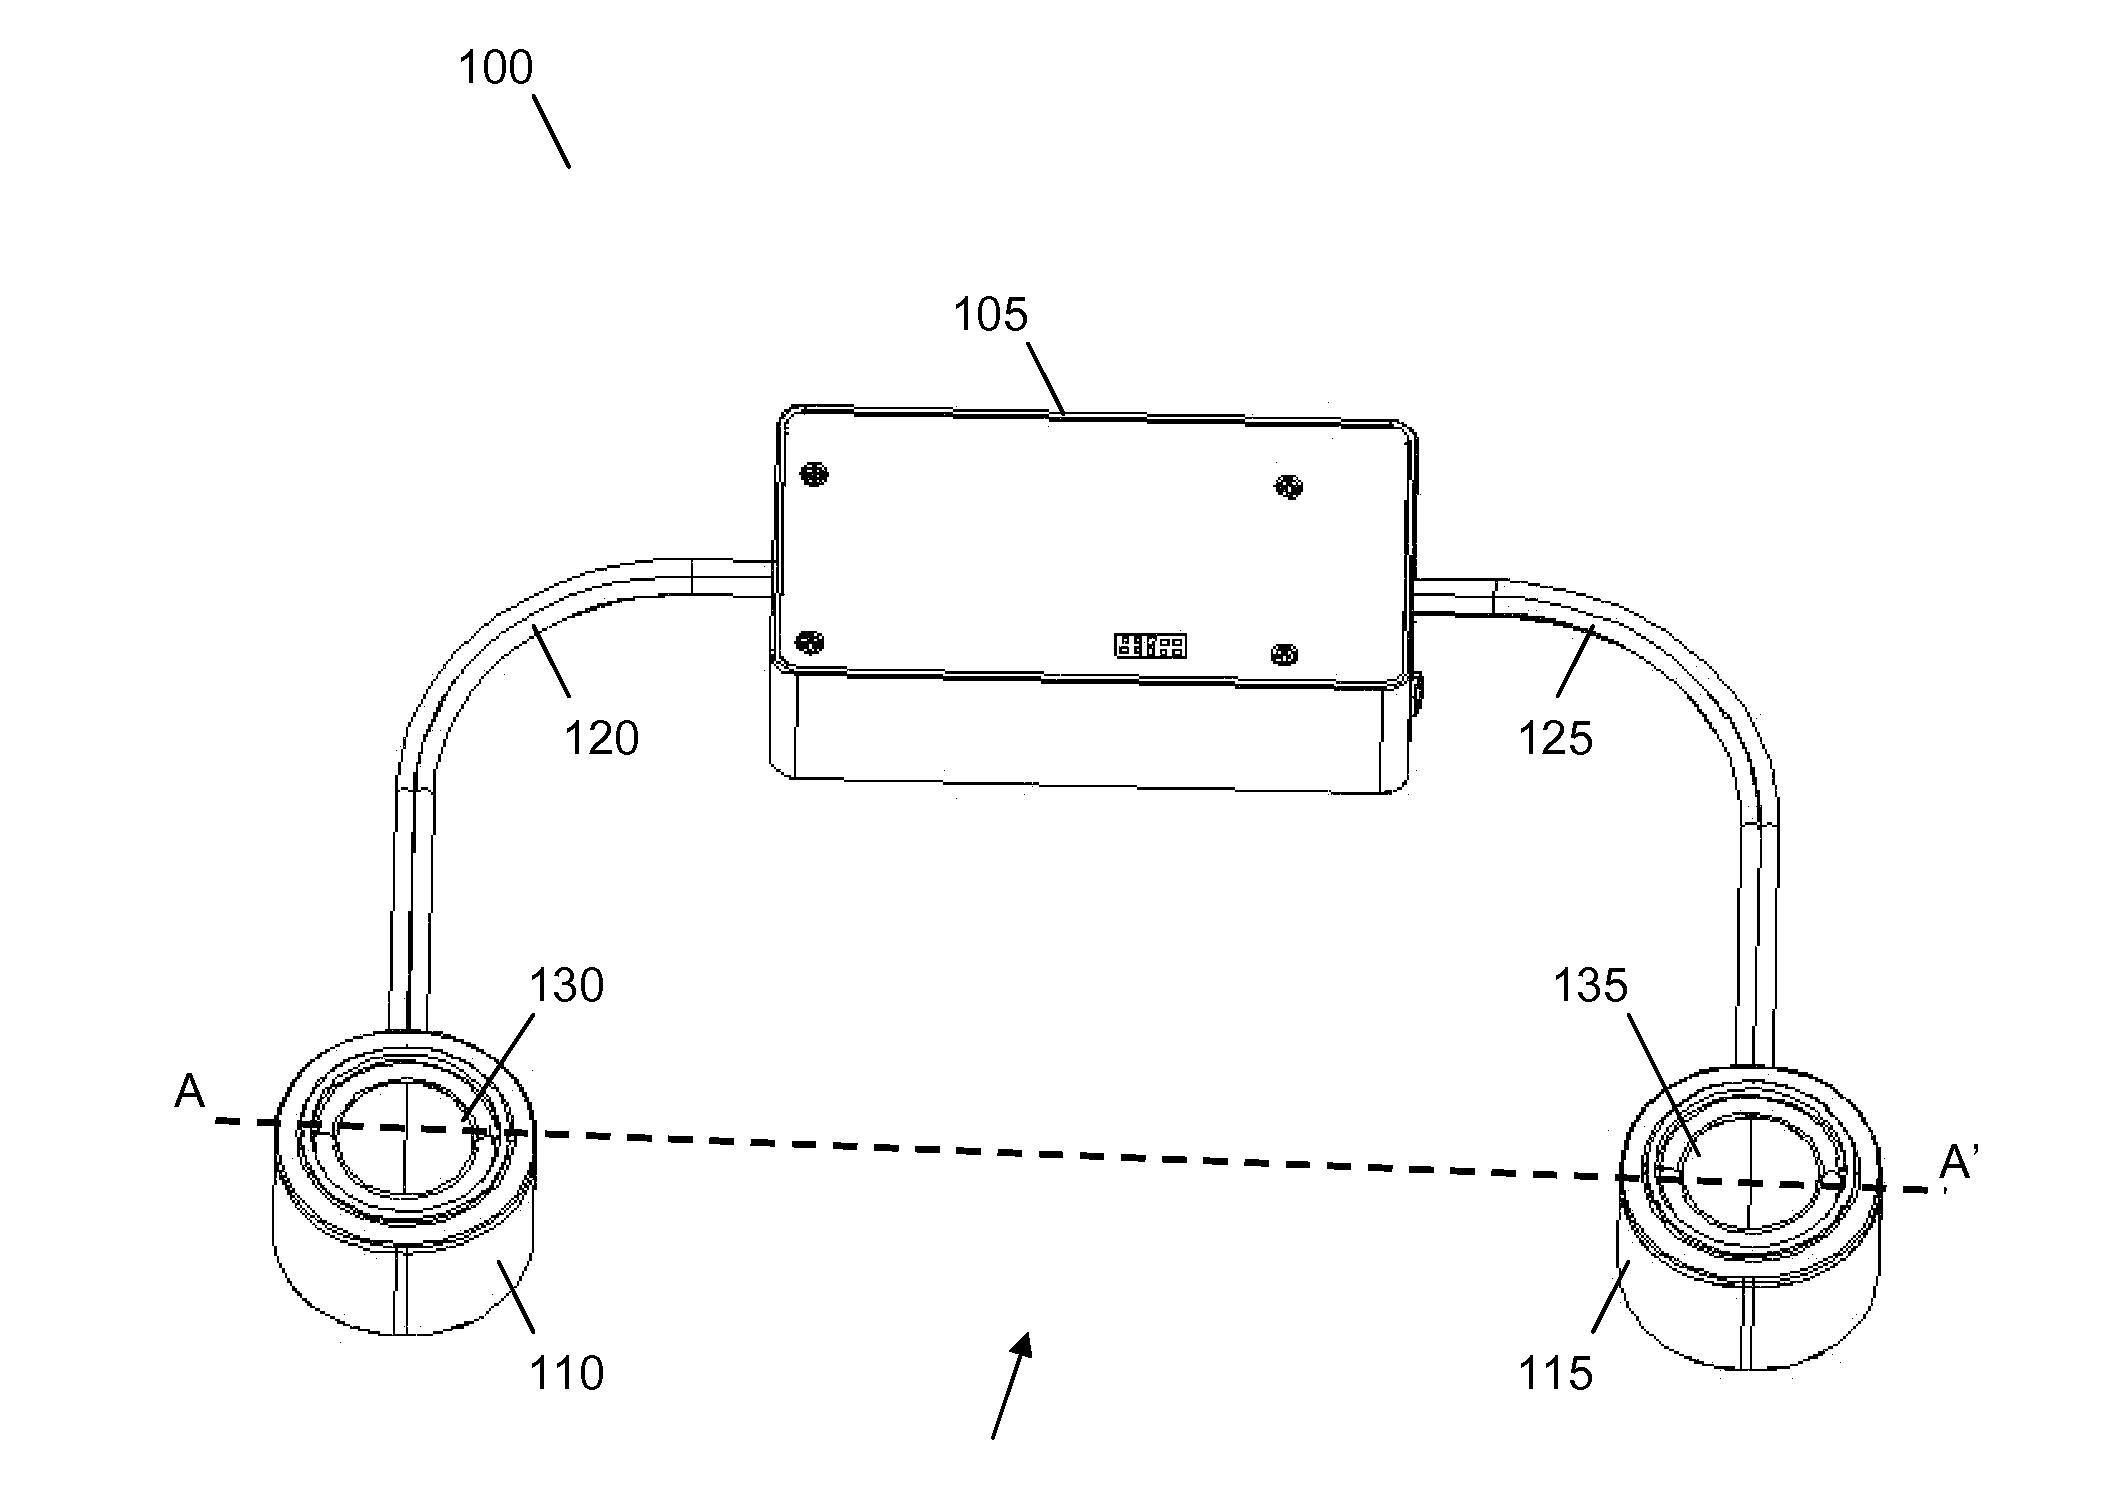 Wearable speaker system with satellite speakers and a passive radiator